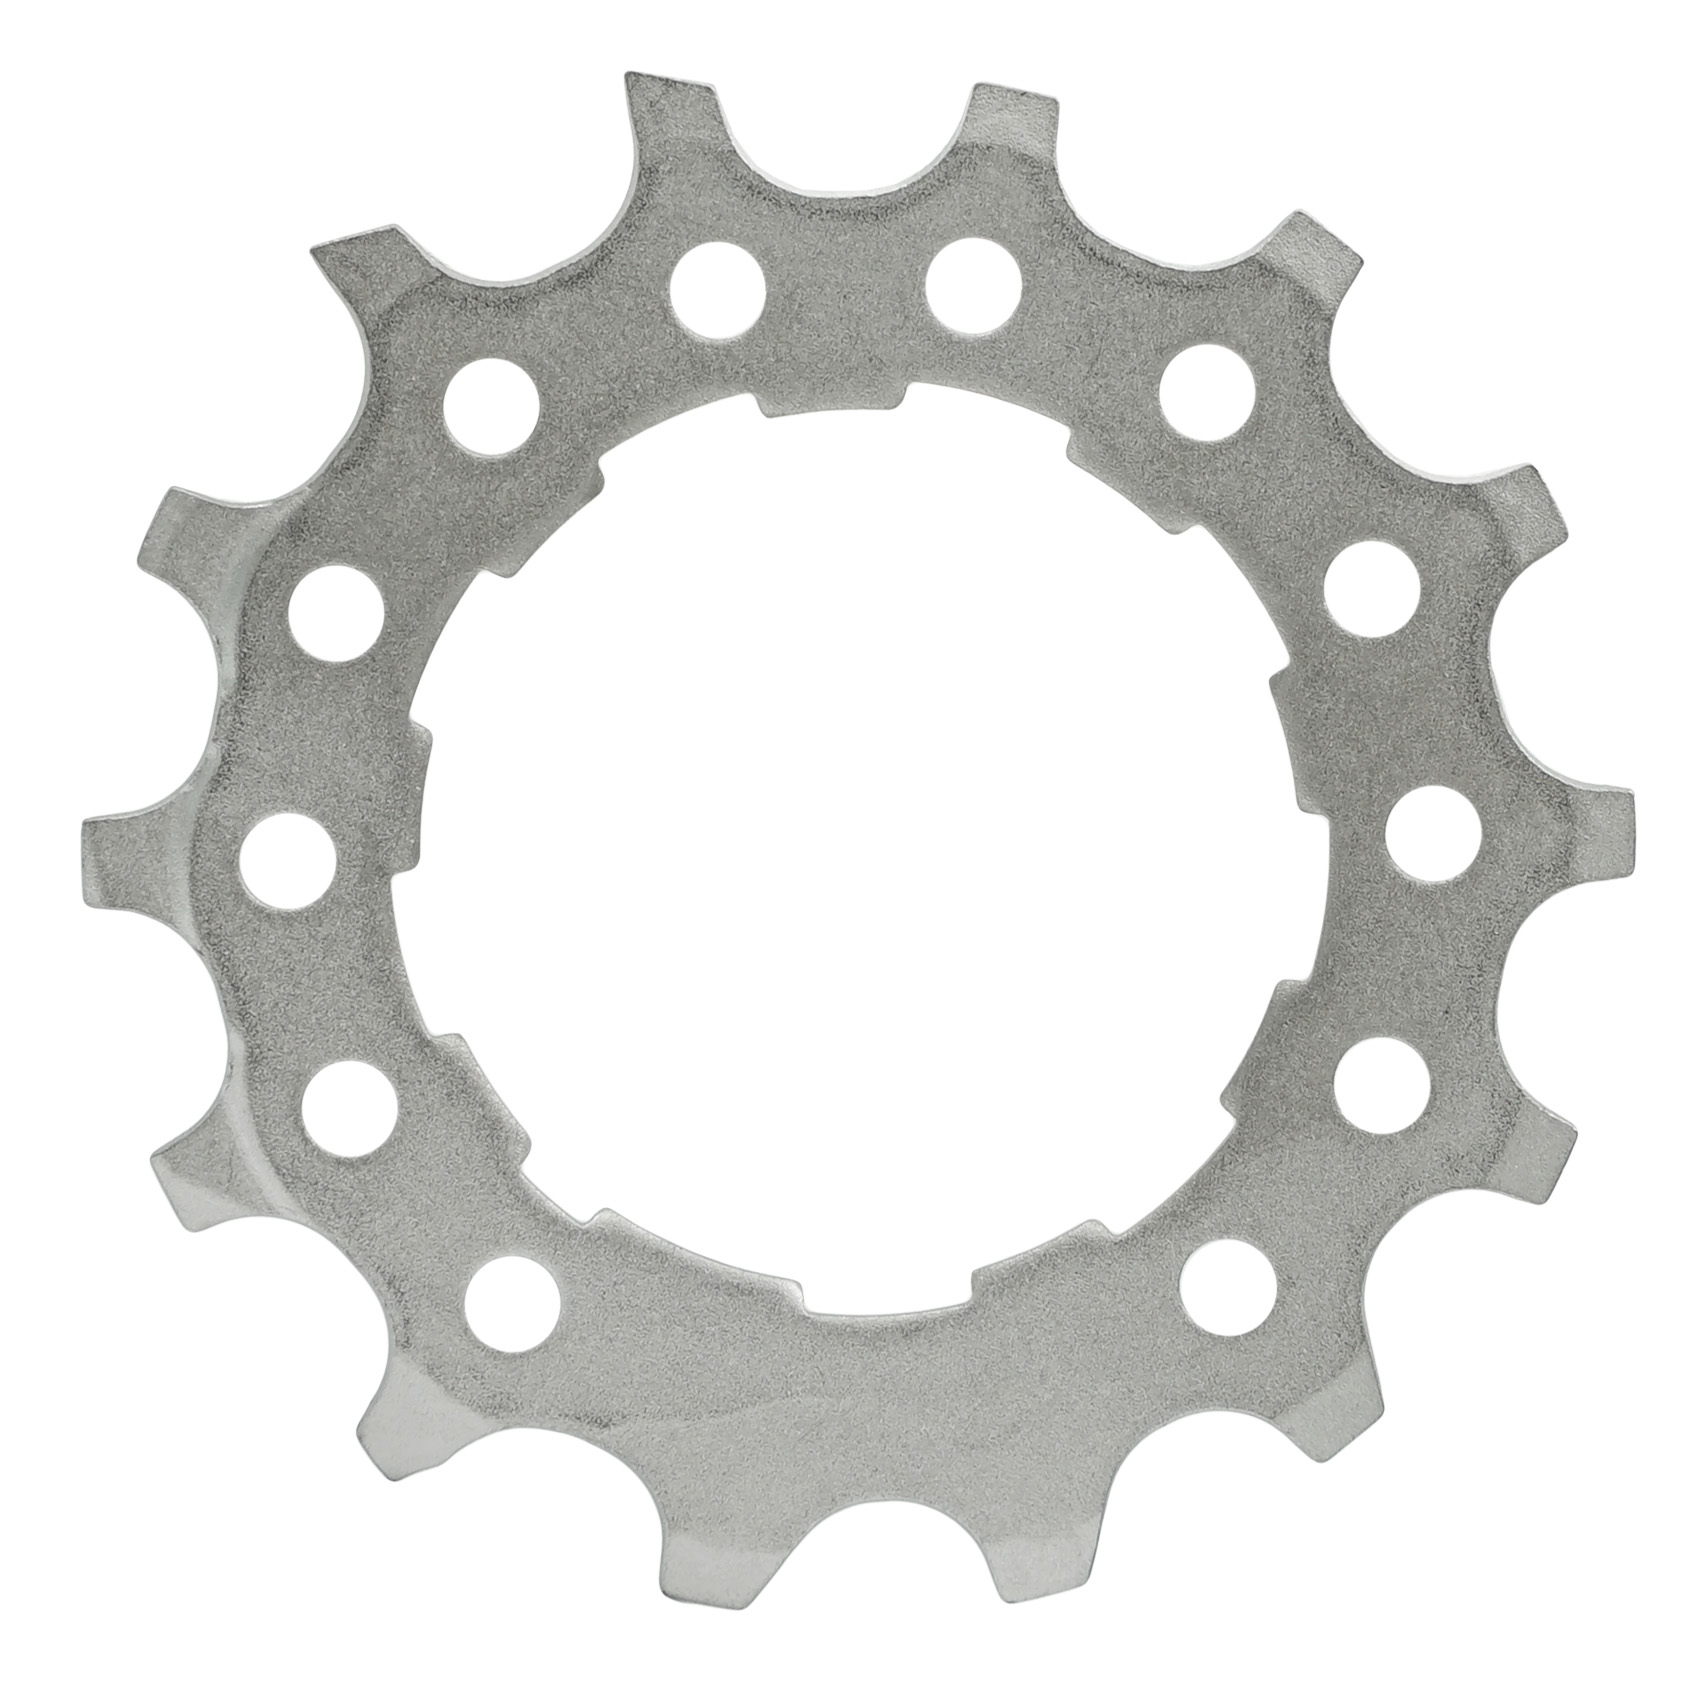 Picture of Shimano Sprocket for Dura Ace 11-Speed Cassette - 14 T for 11-30 | 12-28 (Y1YC14000) - CS-R9100 / CS-9000